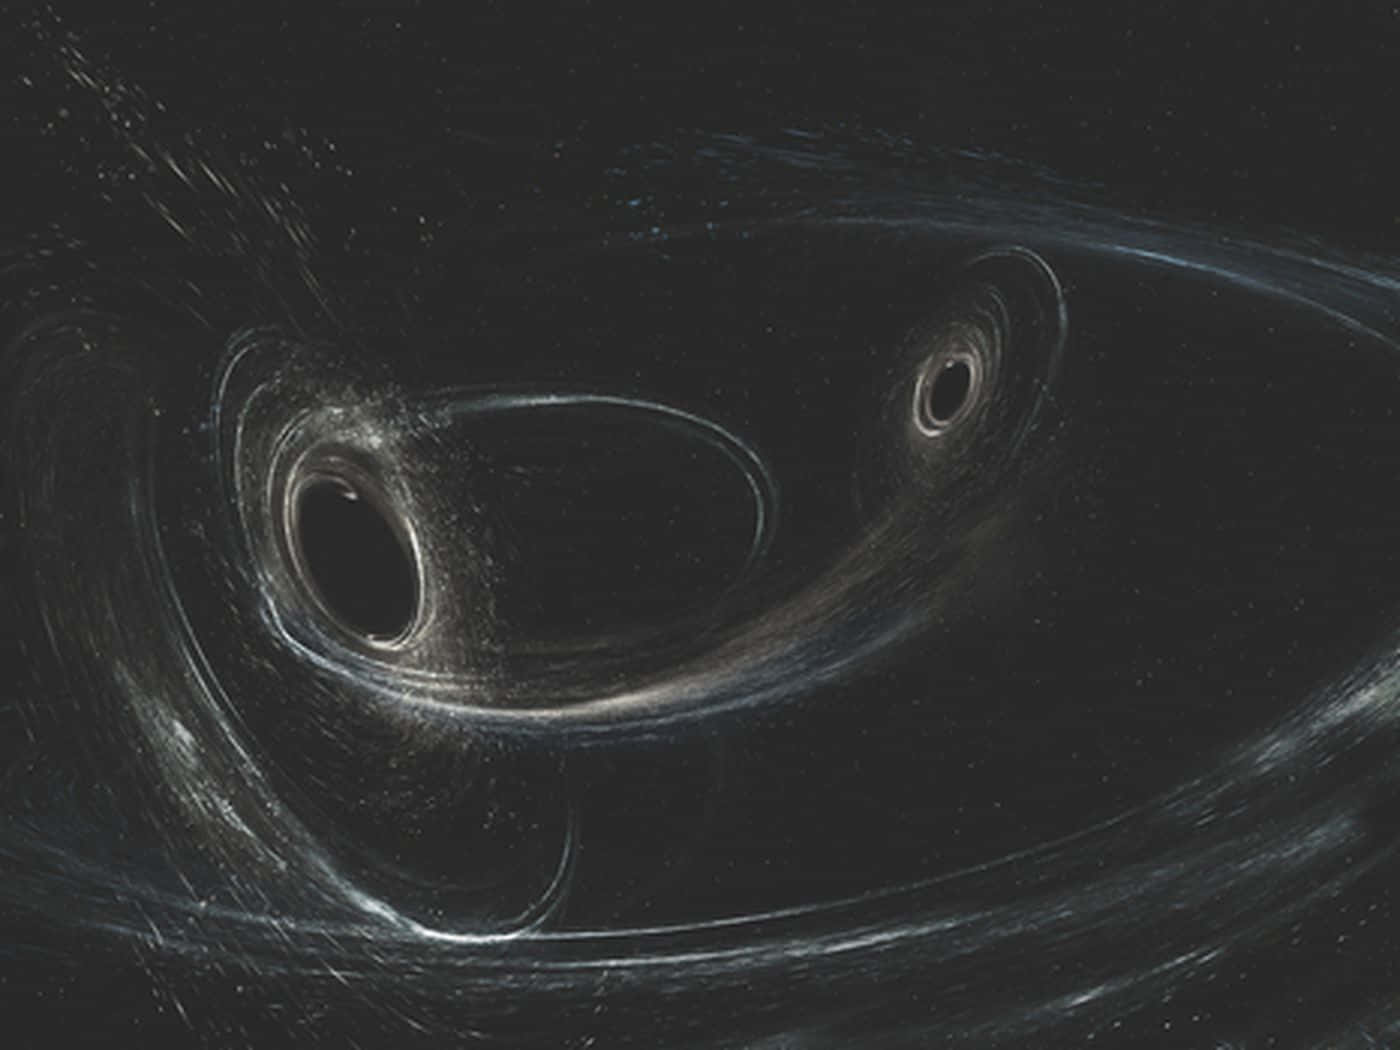 Caption: Gravitational Waves Rippling through Space-Time Wallpaper